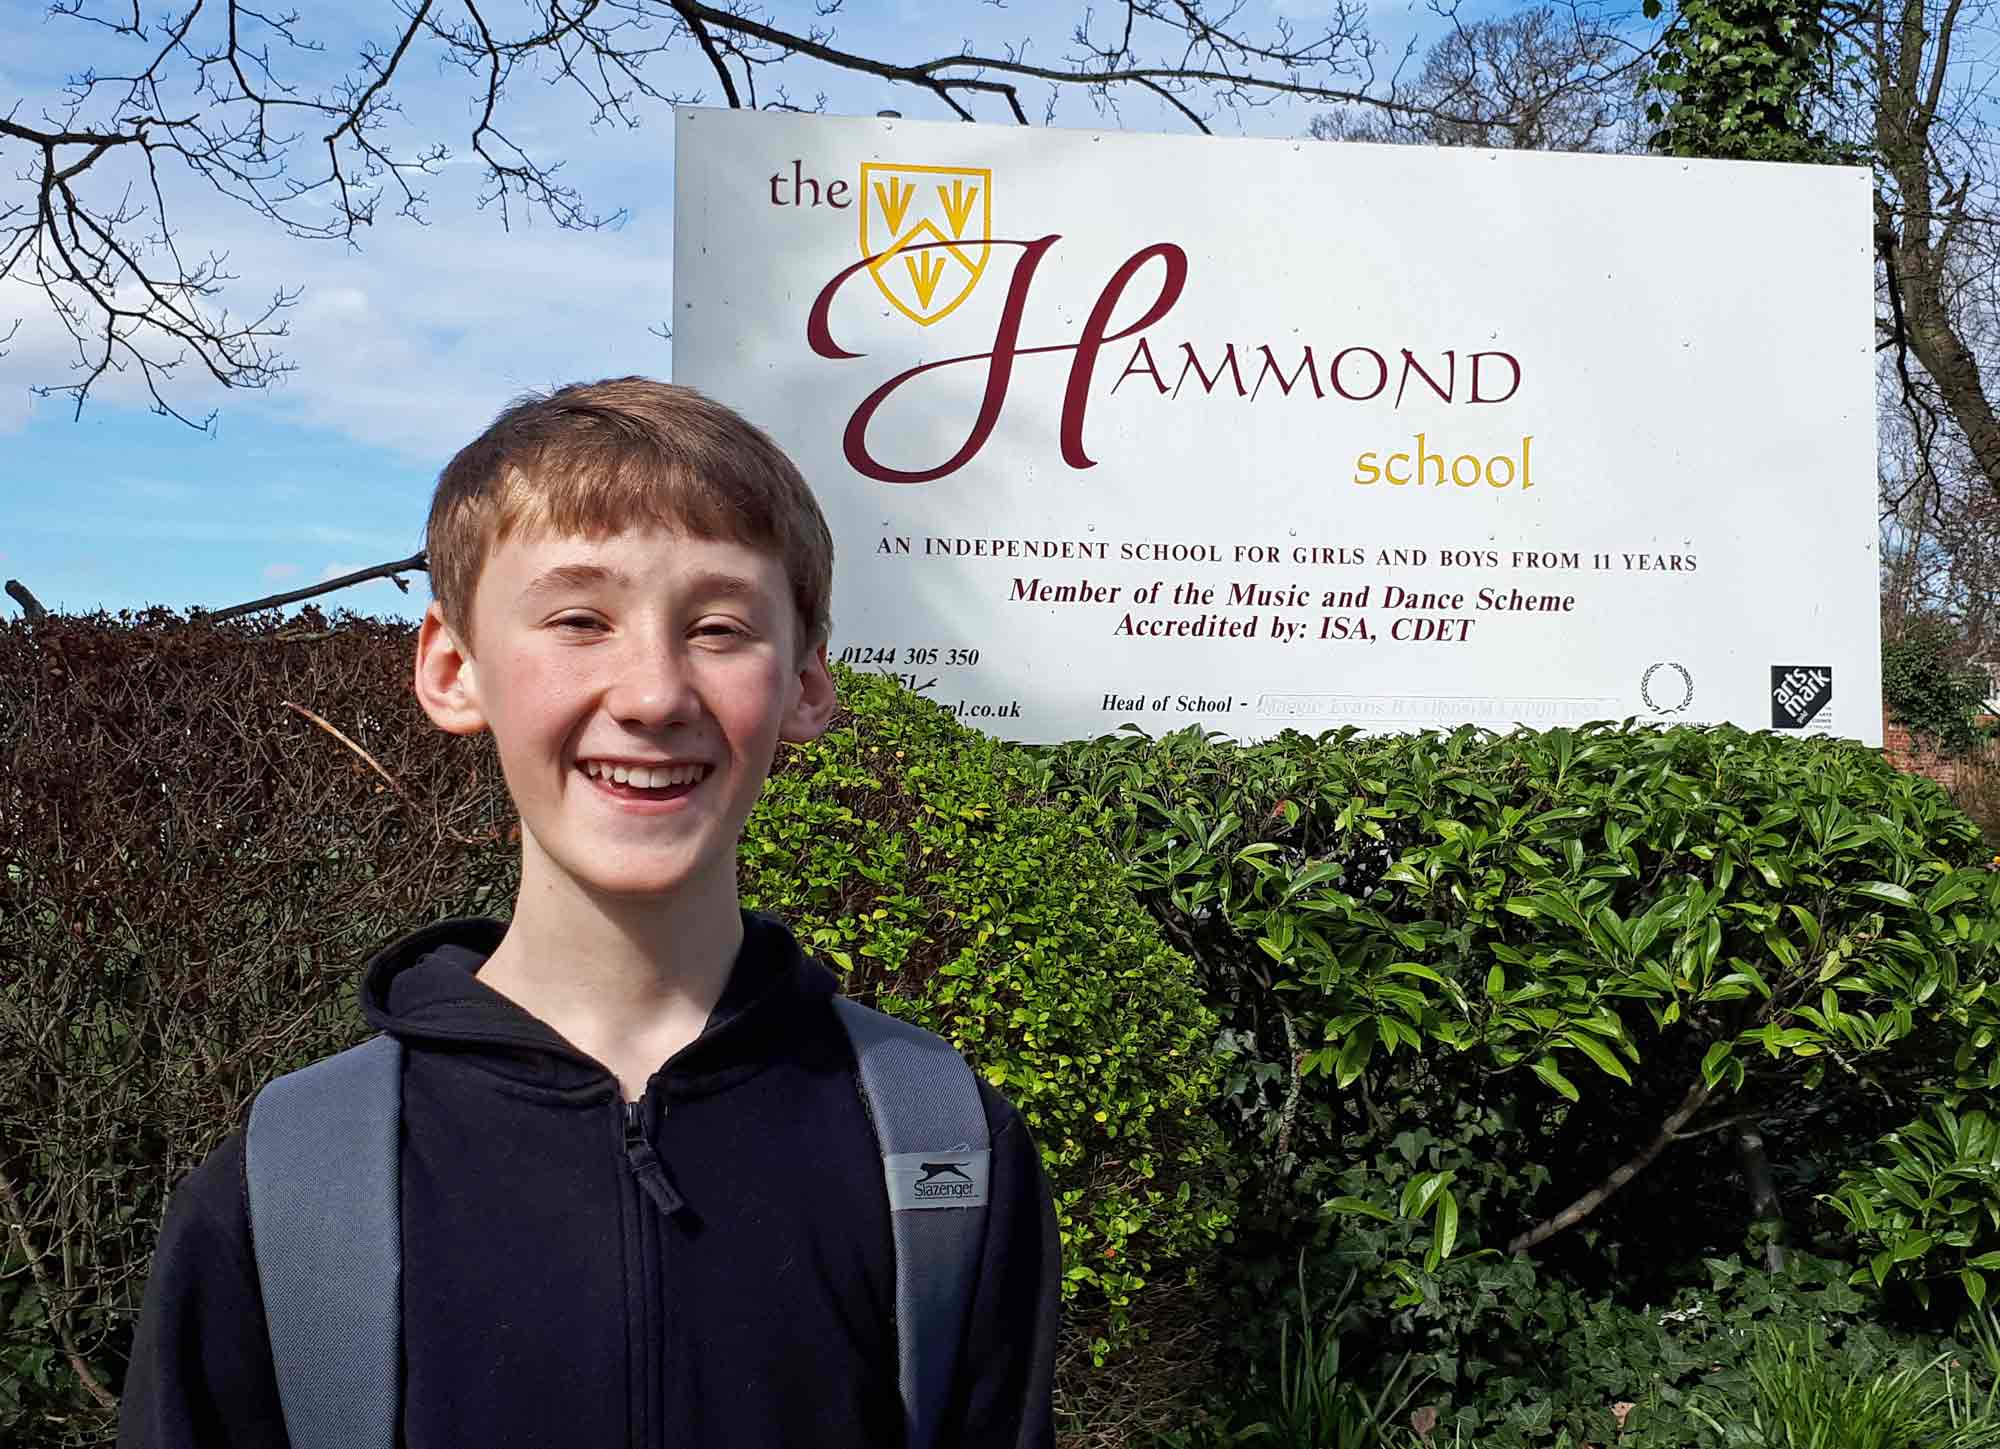 reddie Button, from Starbeck in Harrogate, has gained a much sought-after funded place at The Hammond School in Chester